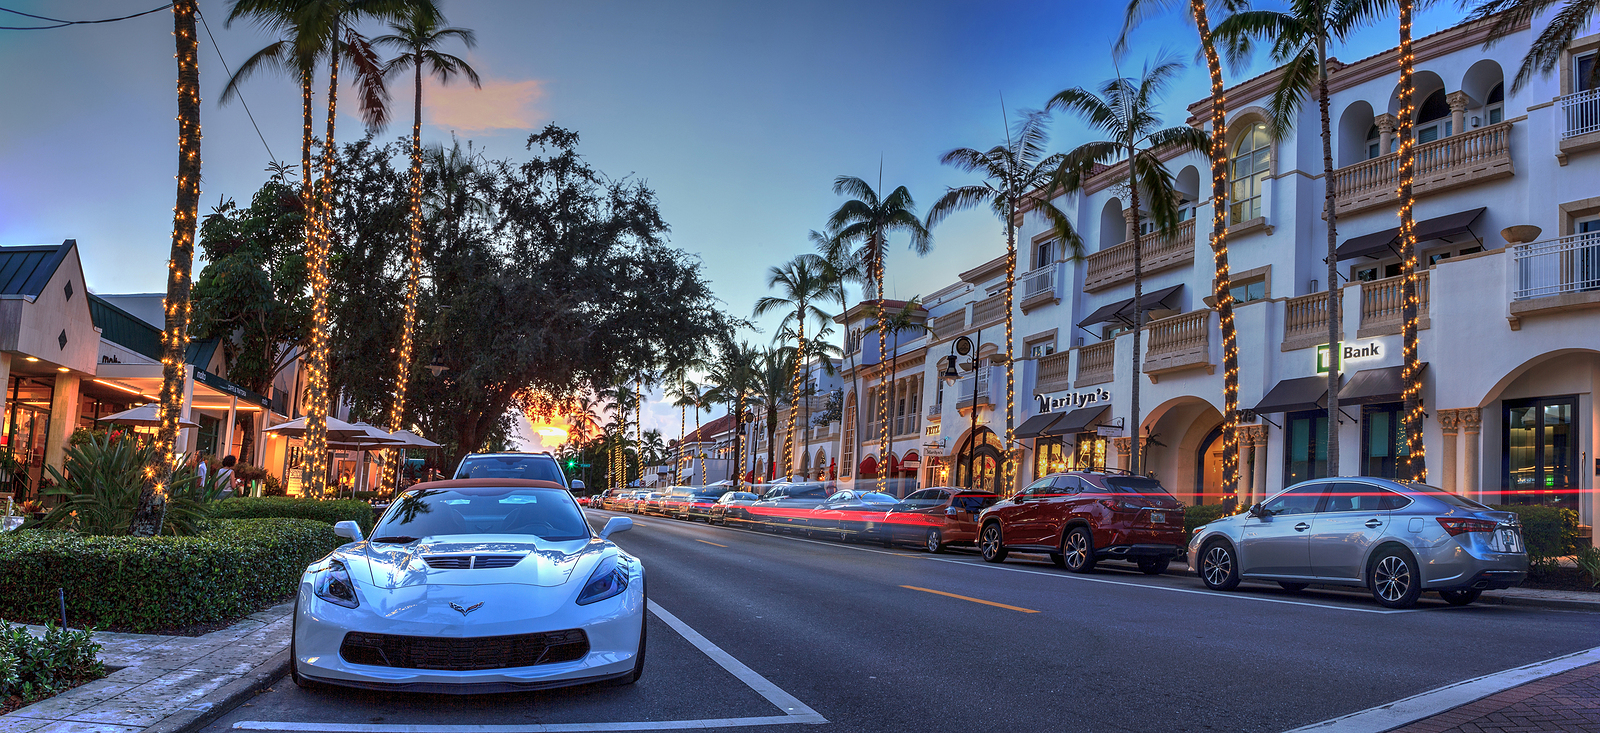 The Best Places To Shop In Naples, Florida